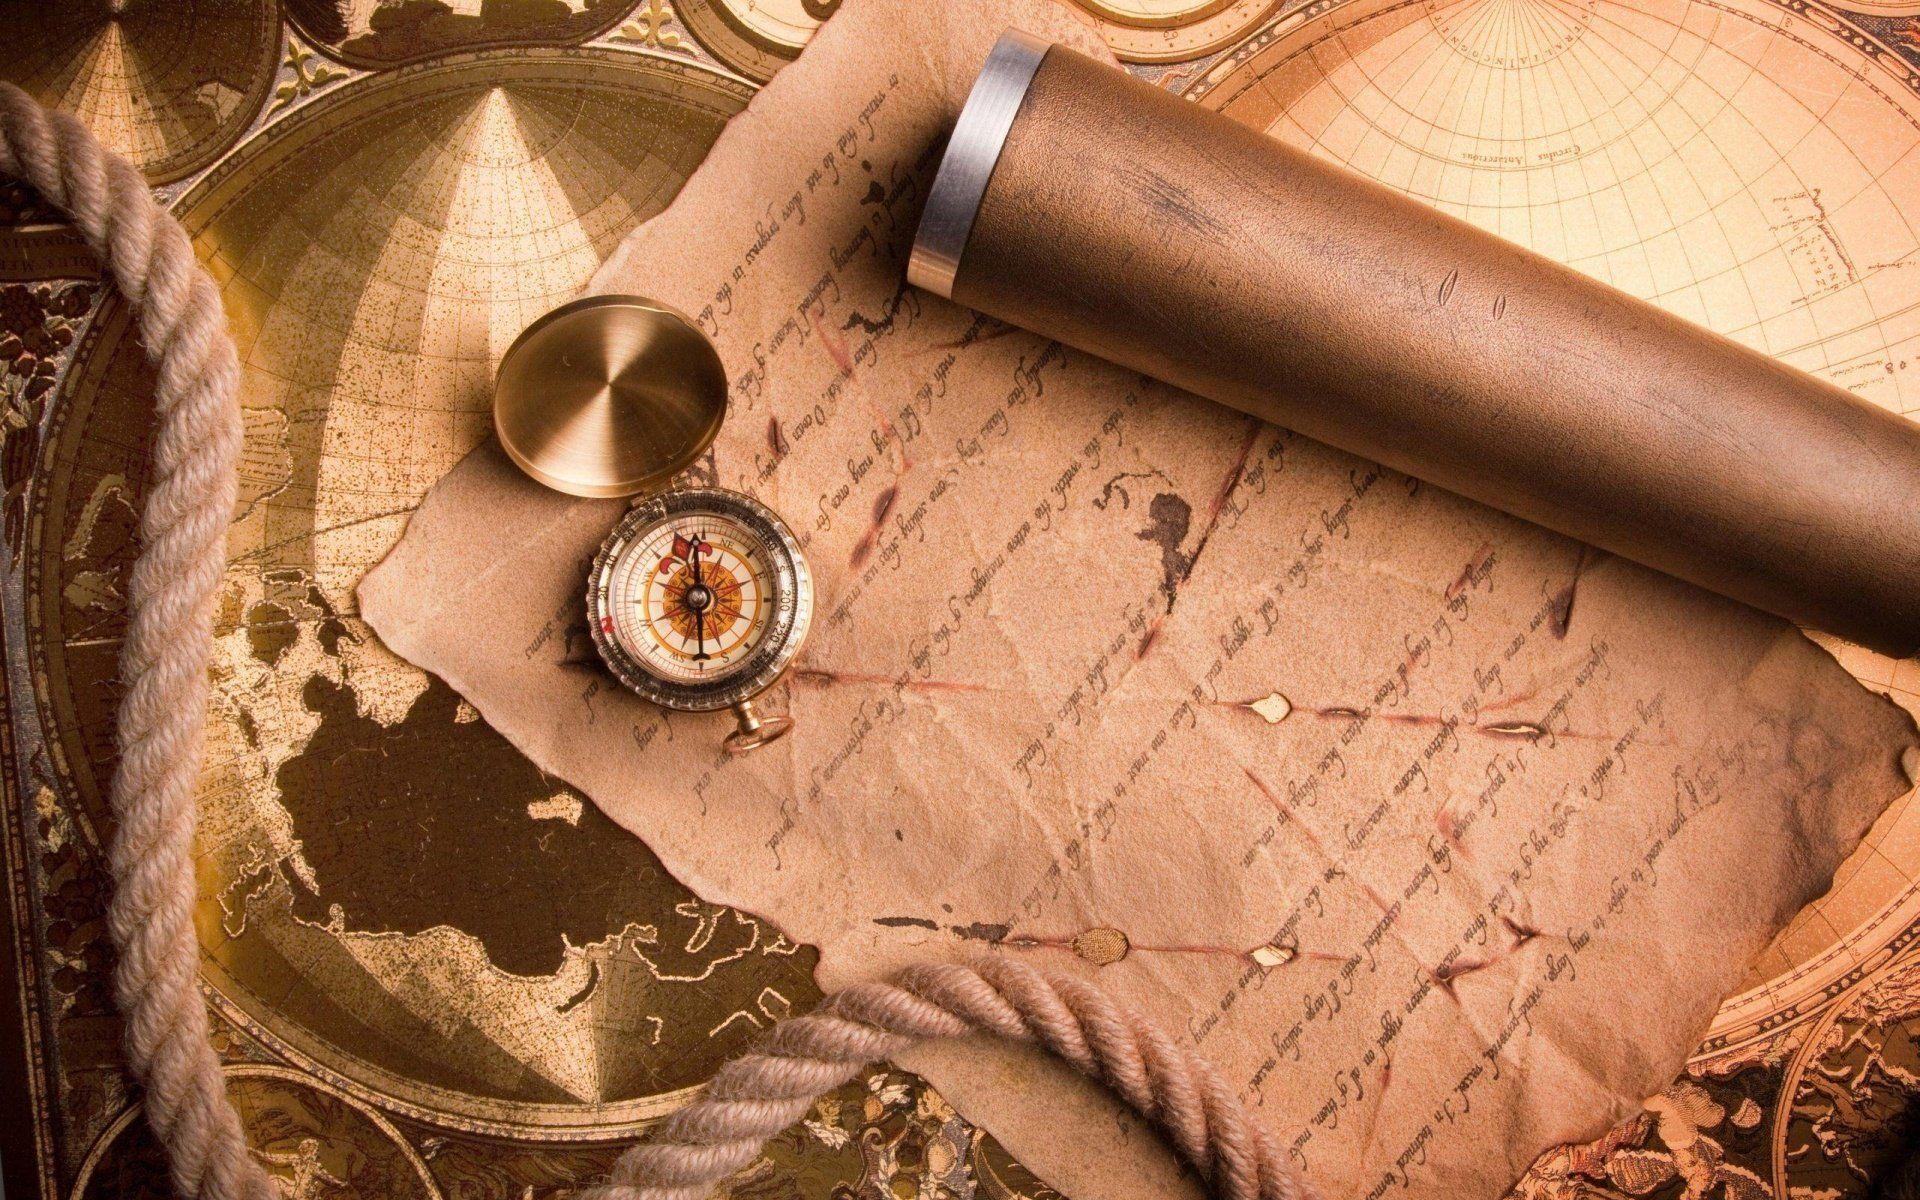 Treasure map Fantasy Abstract Background Wallpaper on Desk